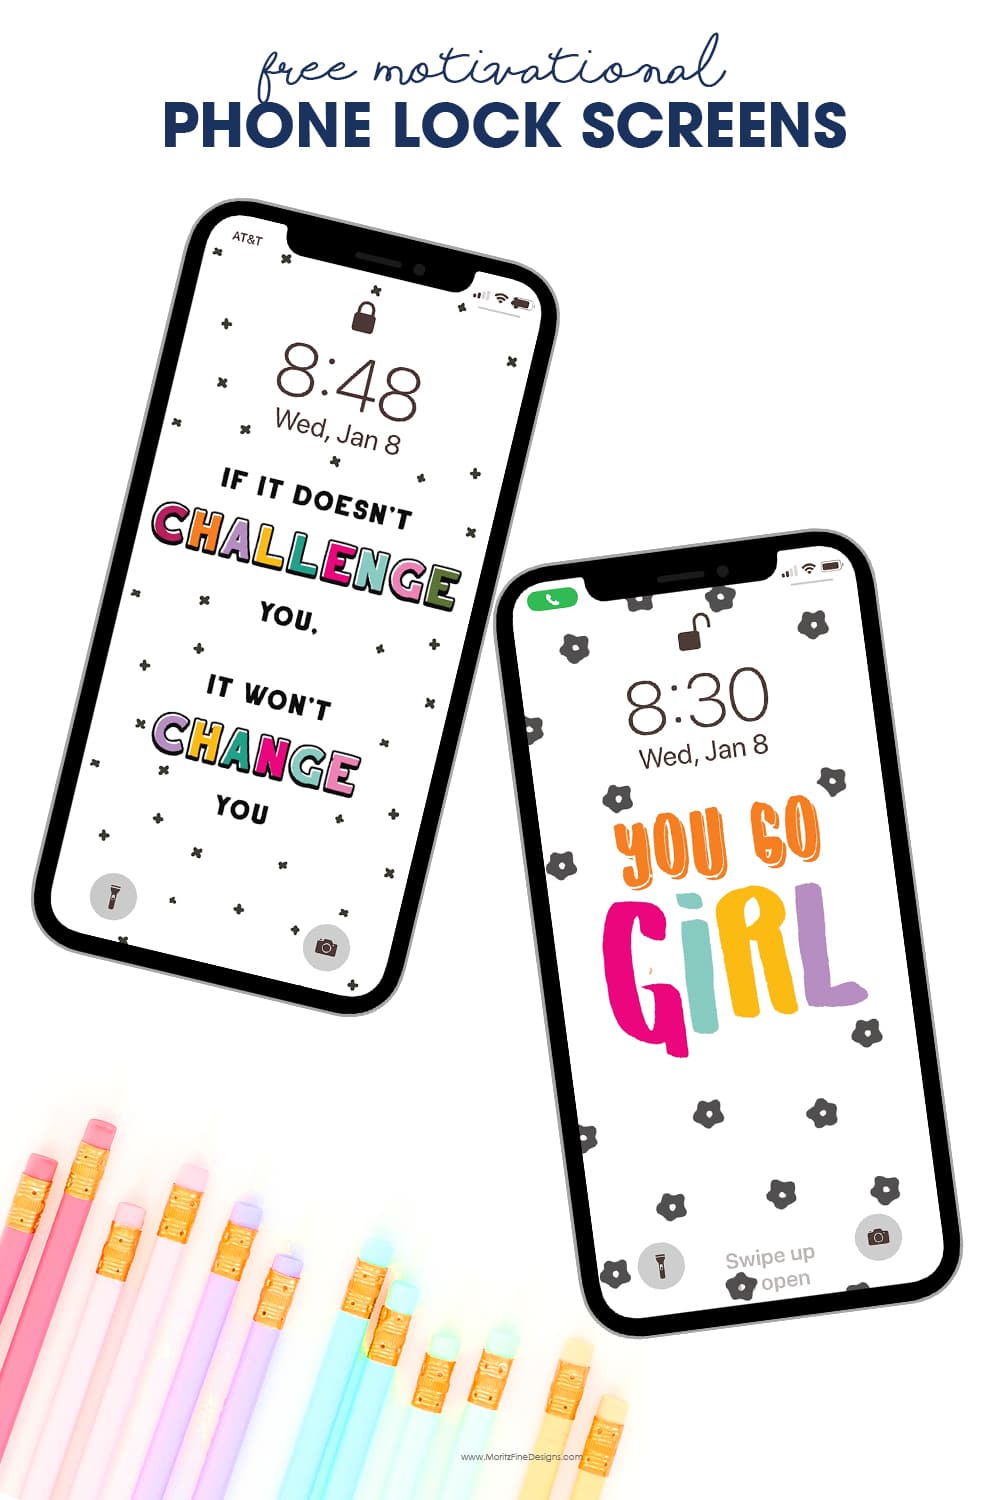 Give your phone a new look and motivate yourself at the same time with these free motivational phone lock screen wallpaper backgrounds.